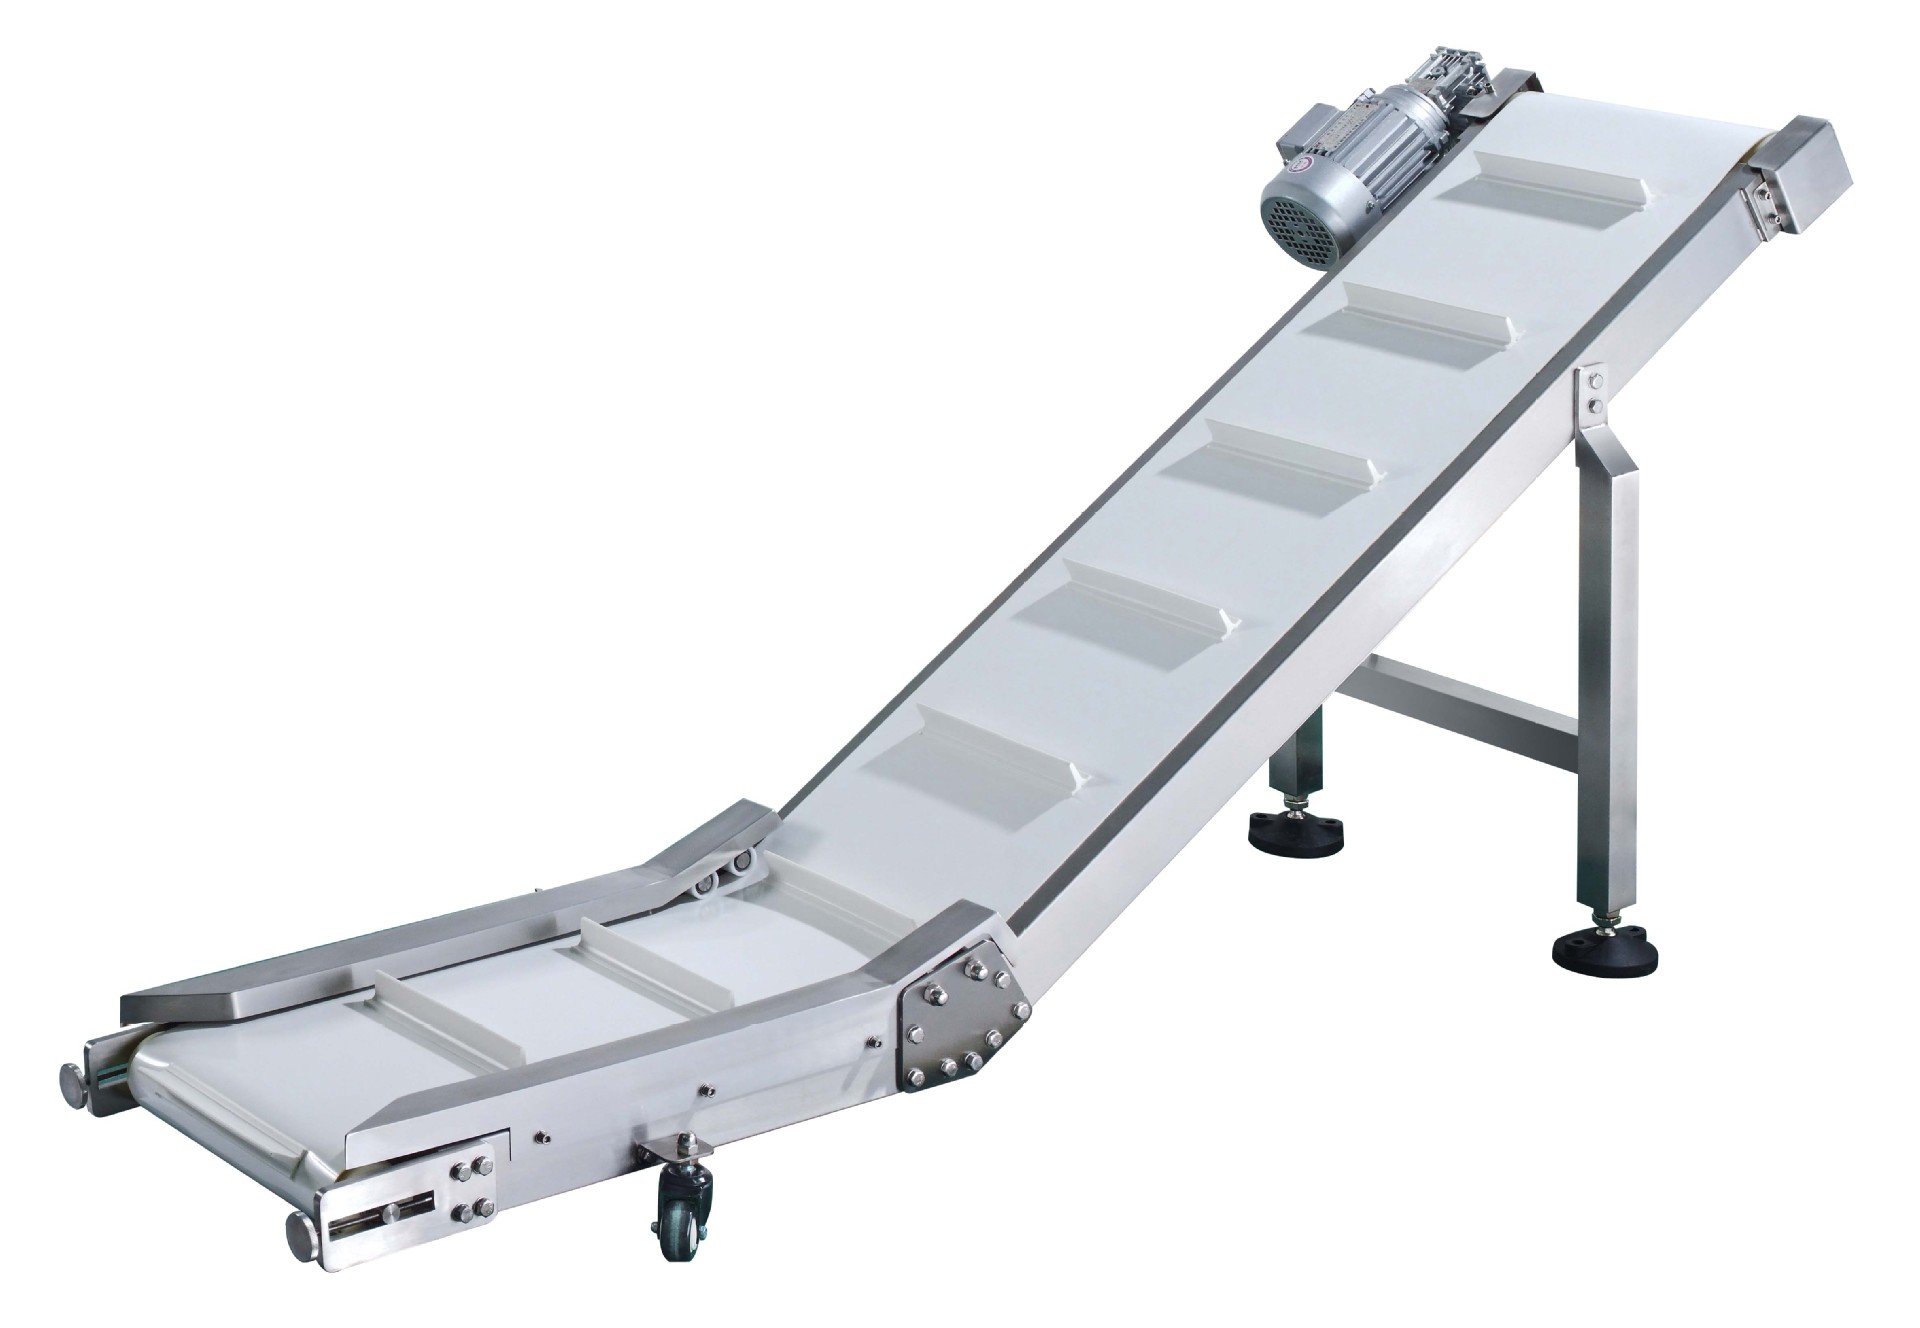 Finished Product Conveyors Boost Industrial Production, Meeting Growing Demands in Modern Industries